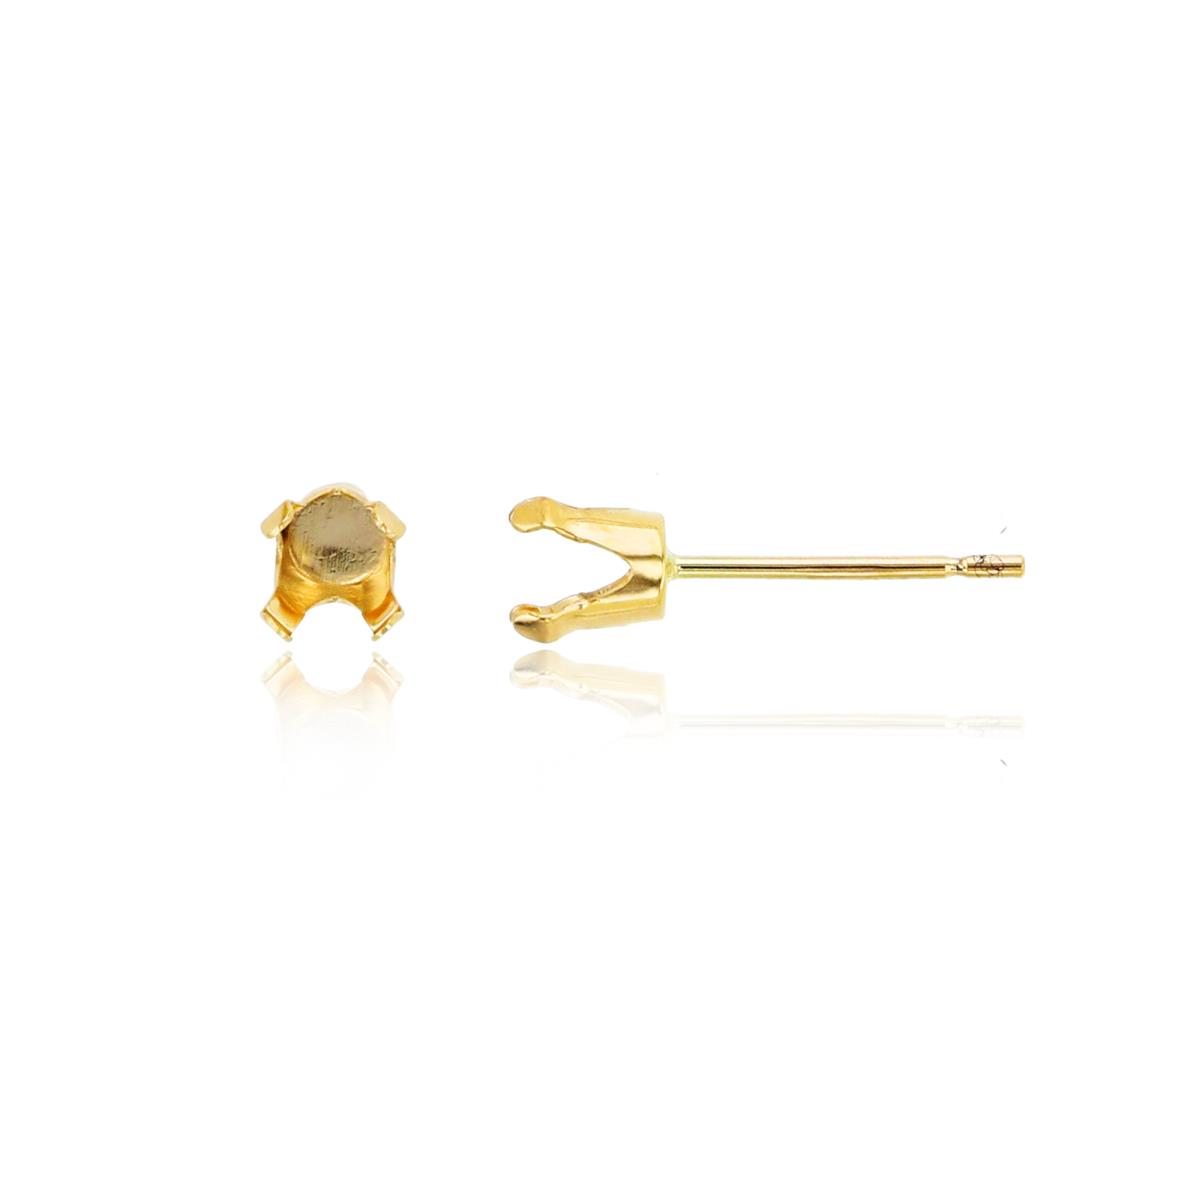 10K Yellow Gold 4mm Rd 4-Prong Stud Finding (PR)